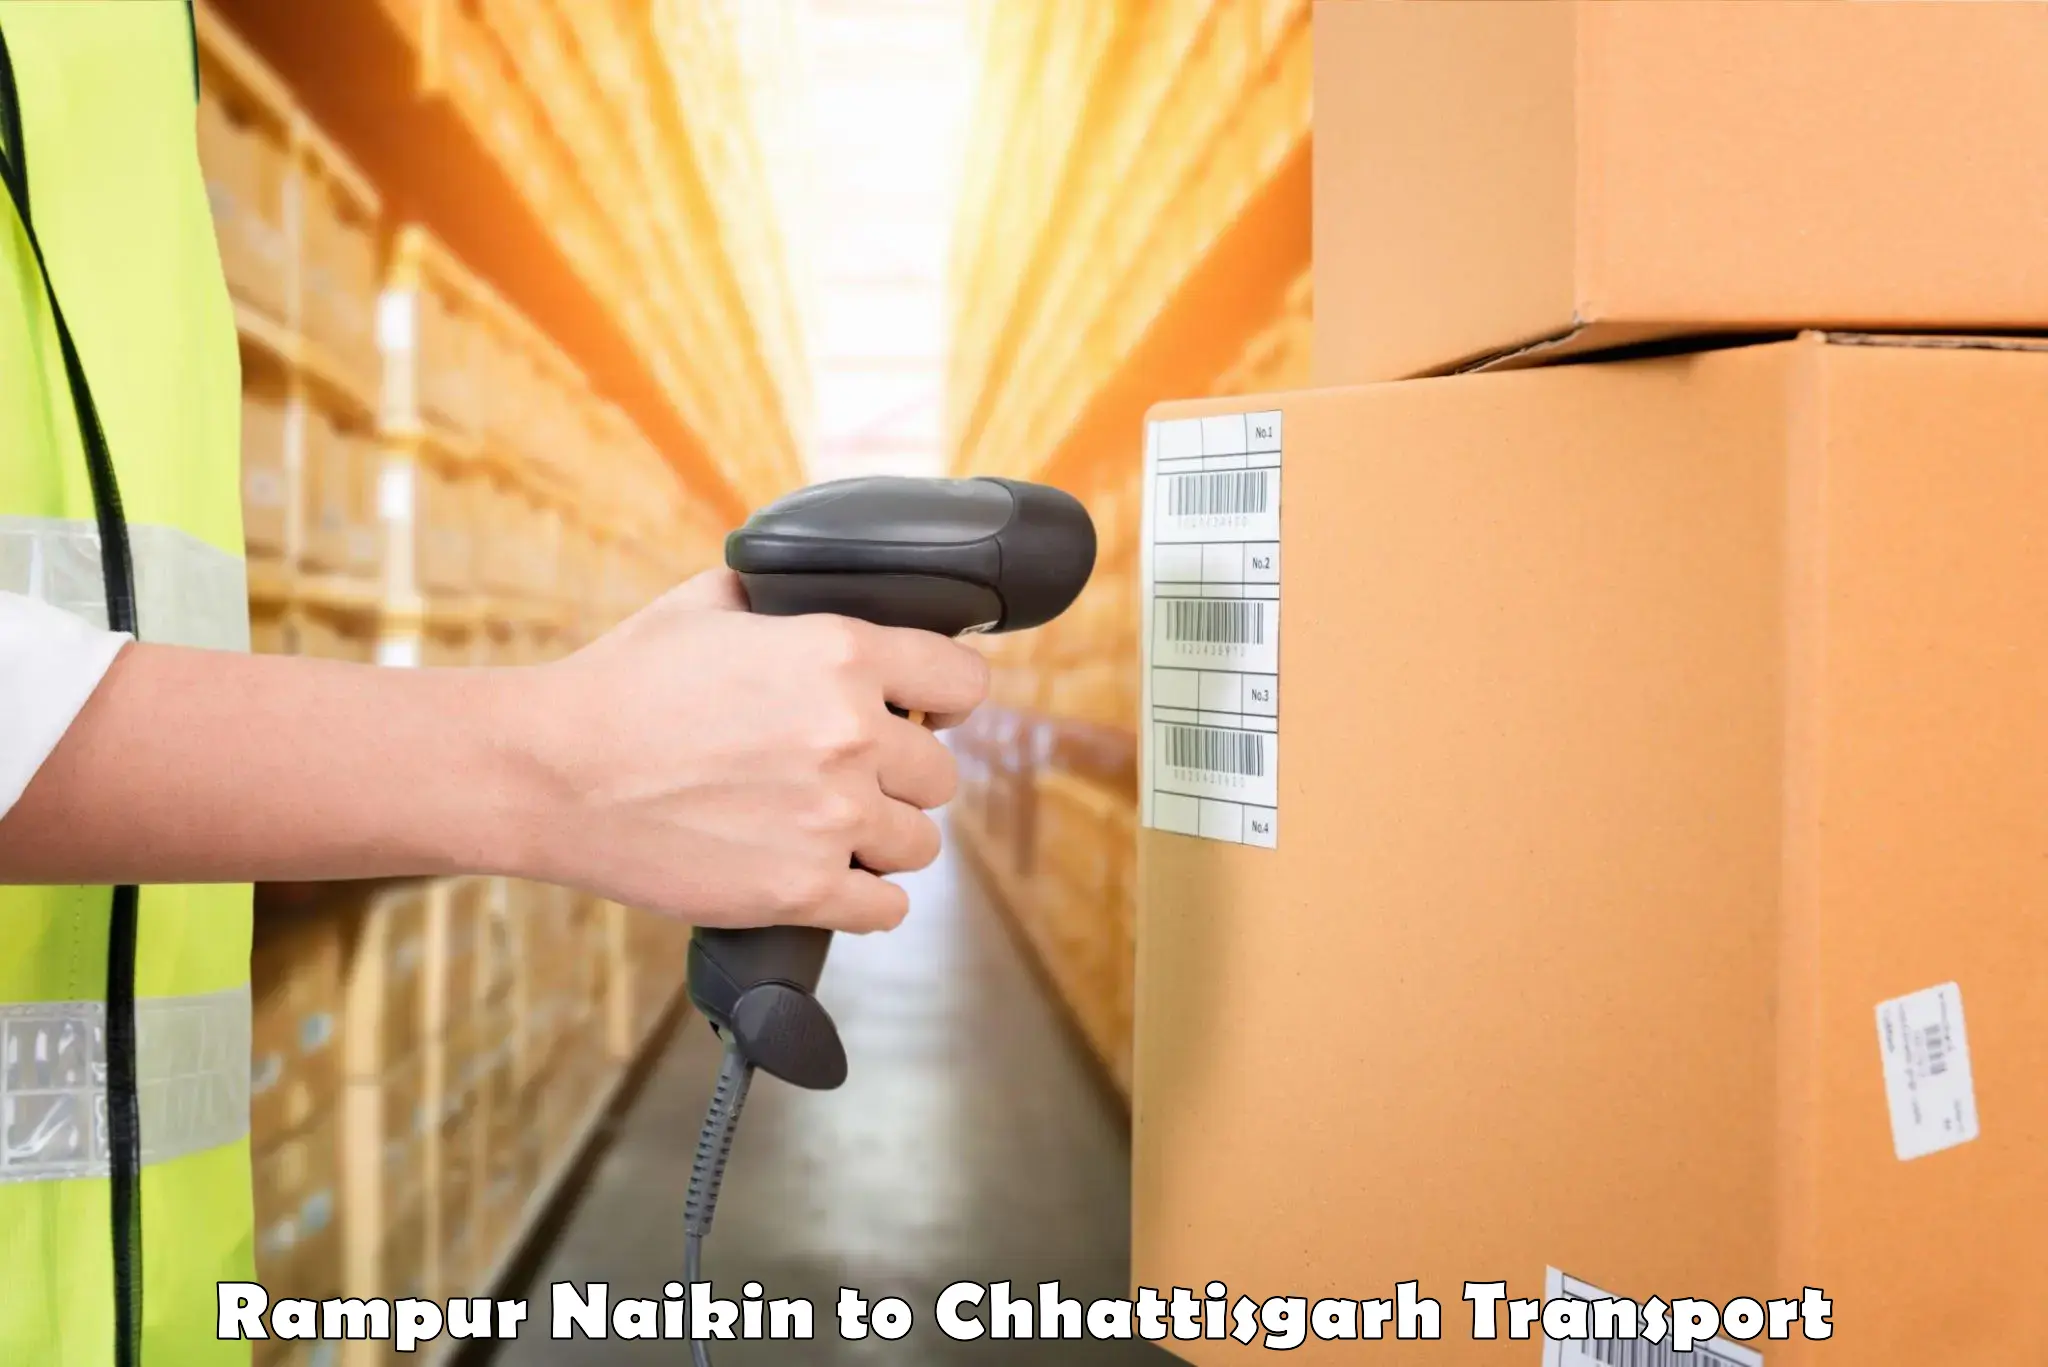 Goods delivery service Rampur Naikin to Lailunga